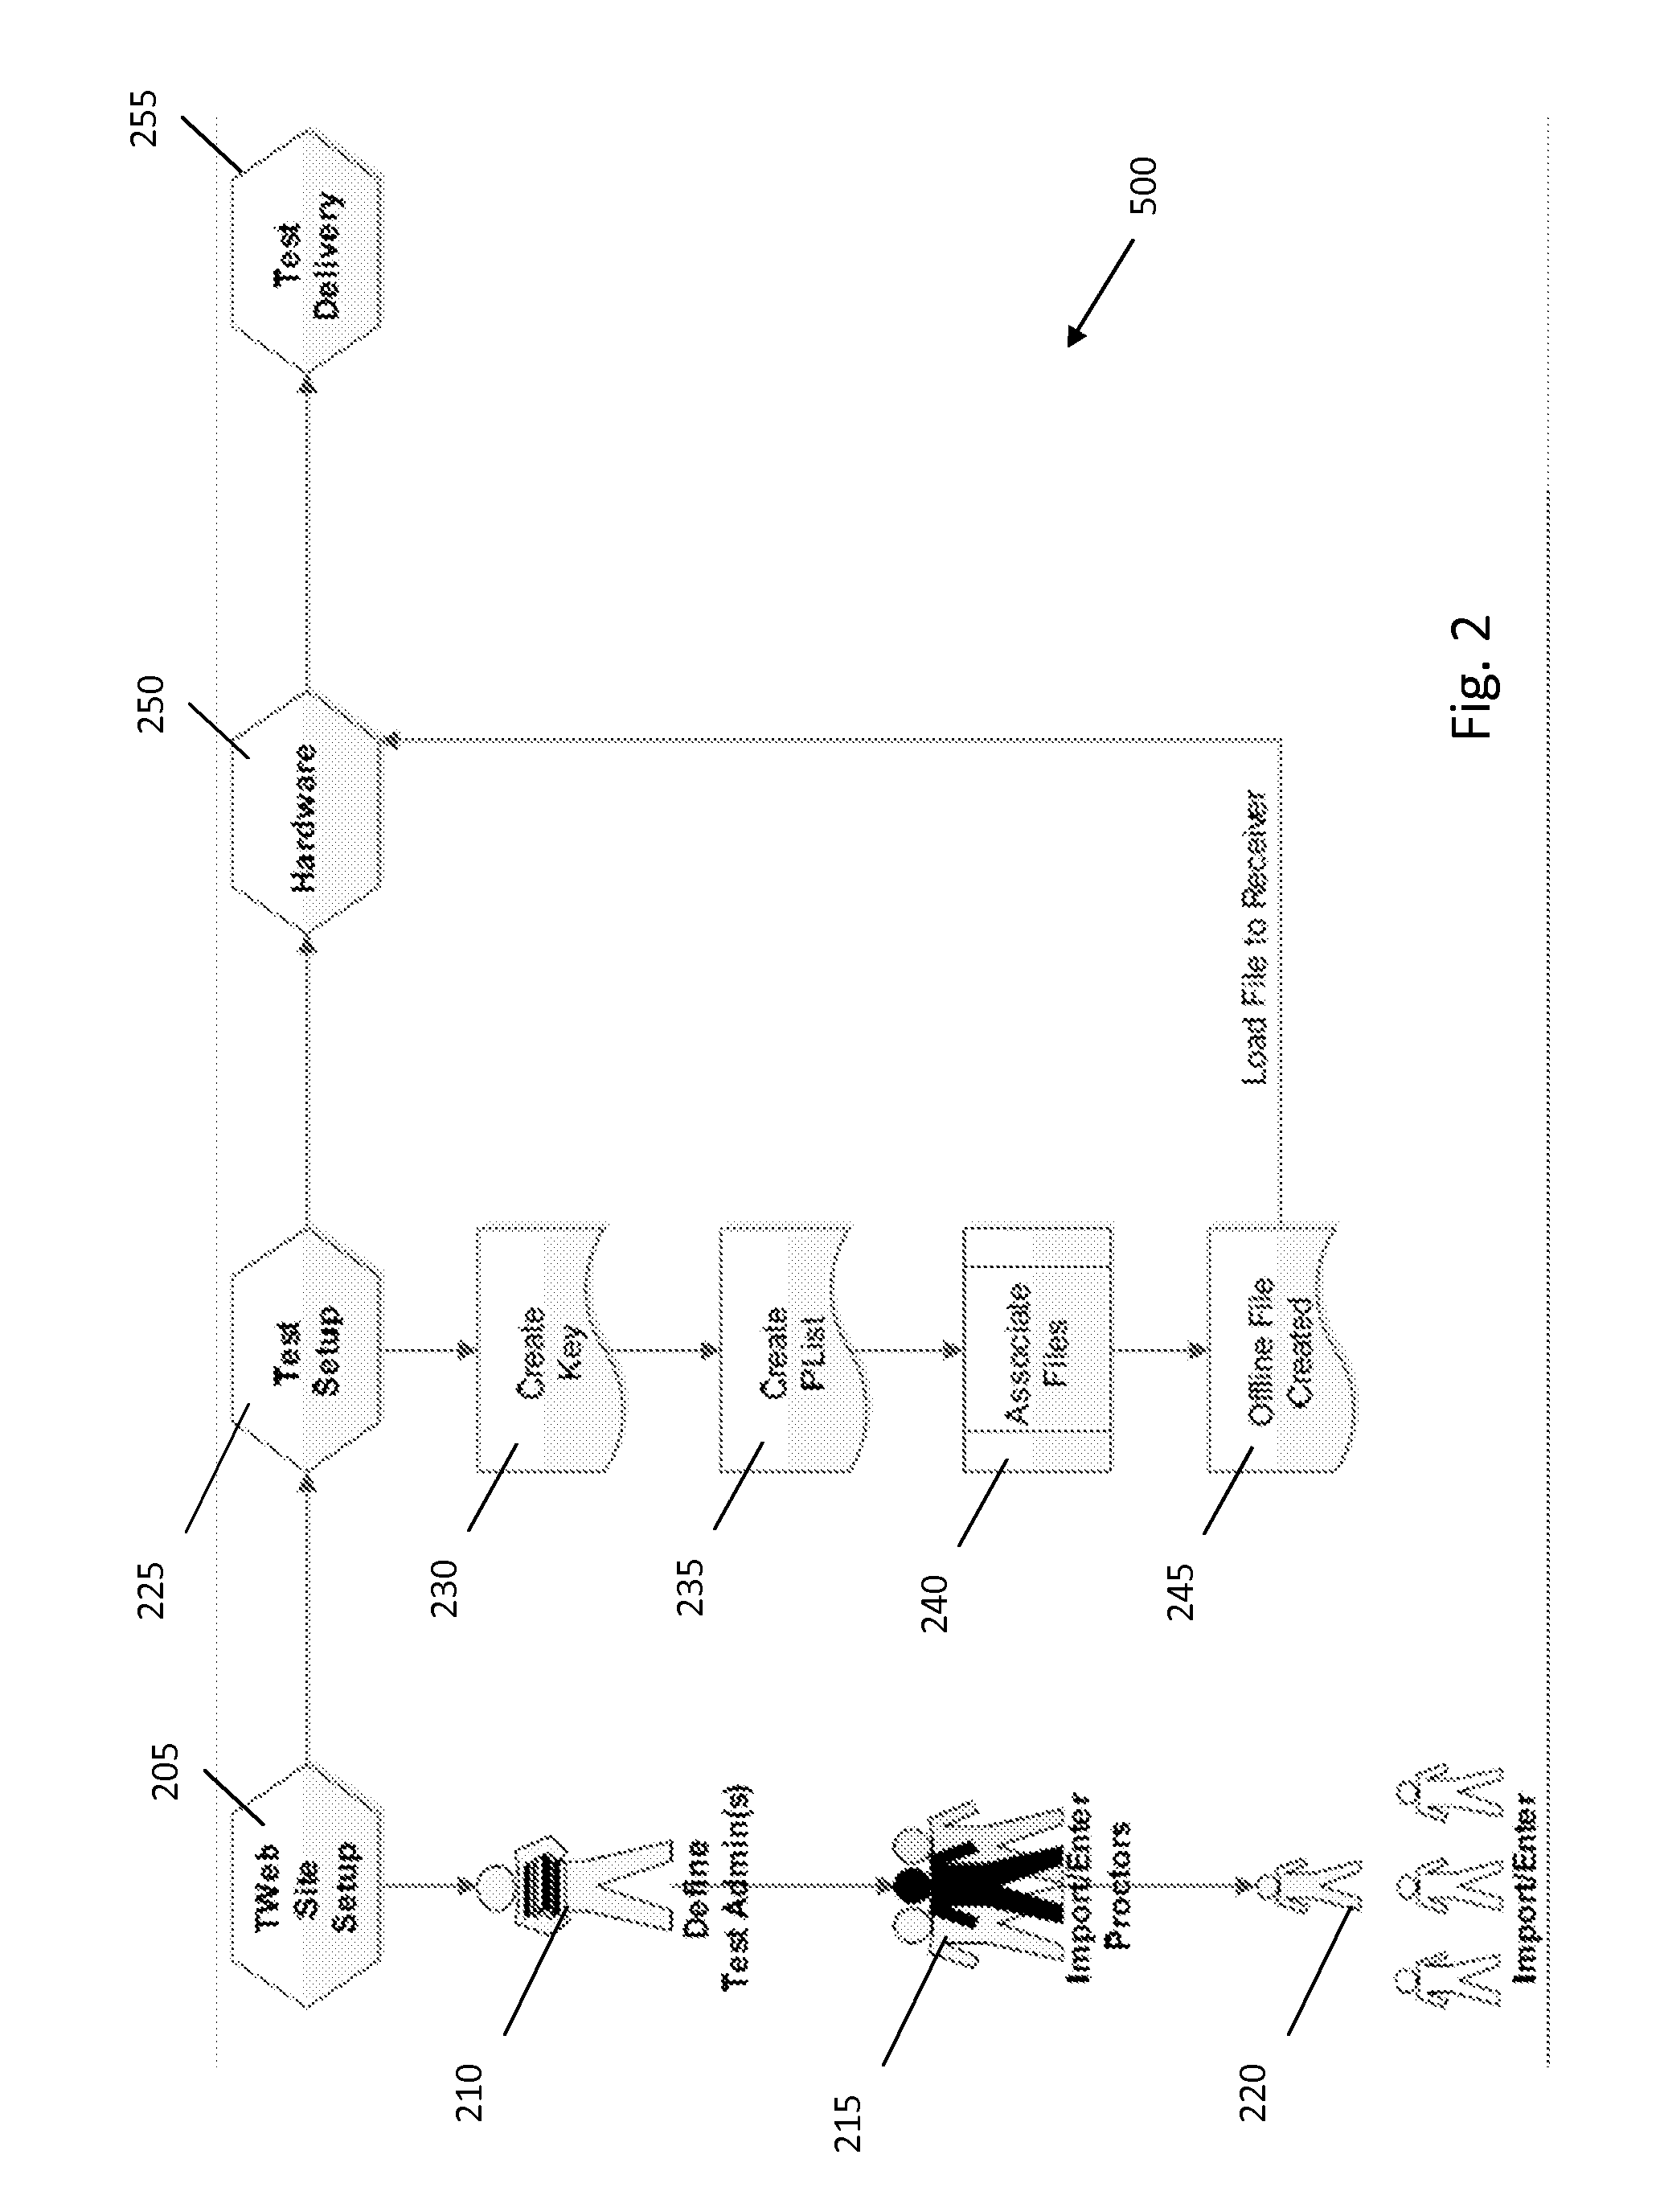 System and method for managing and administering a high stakes test